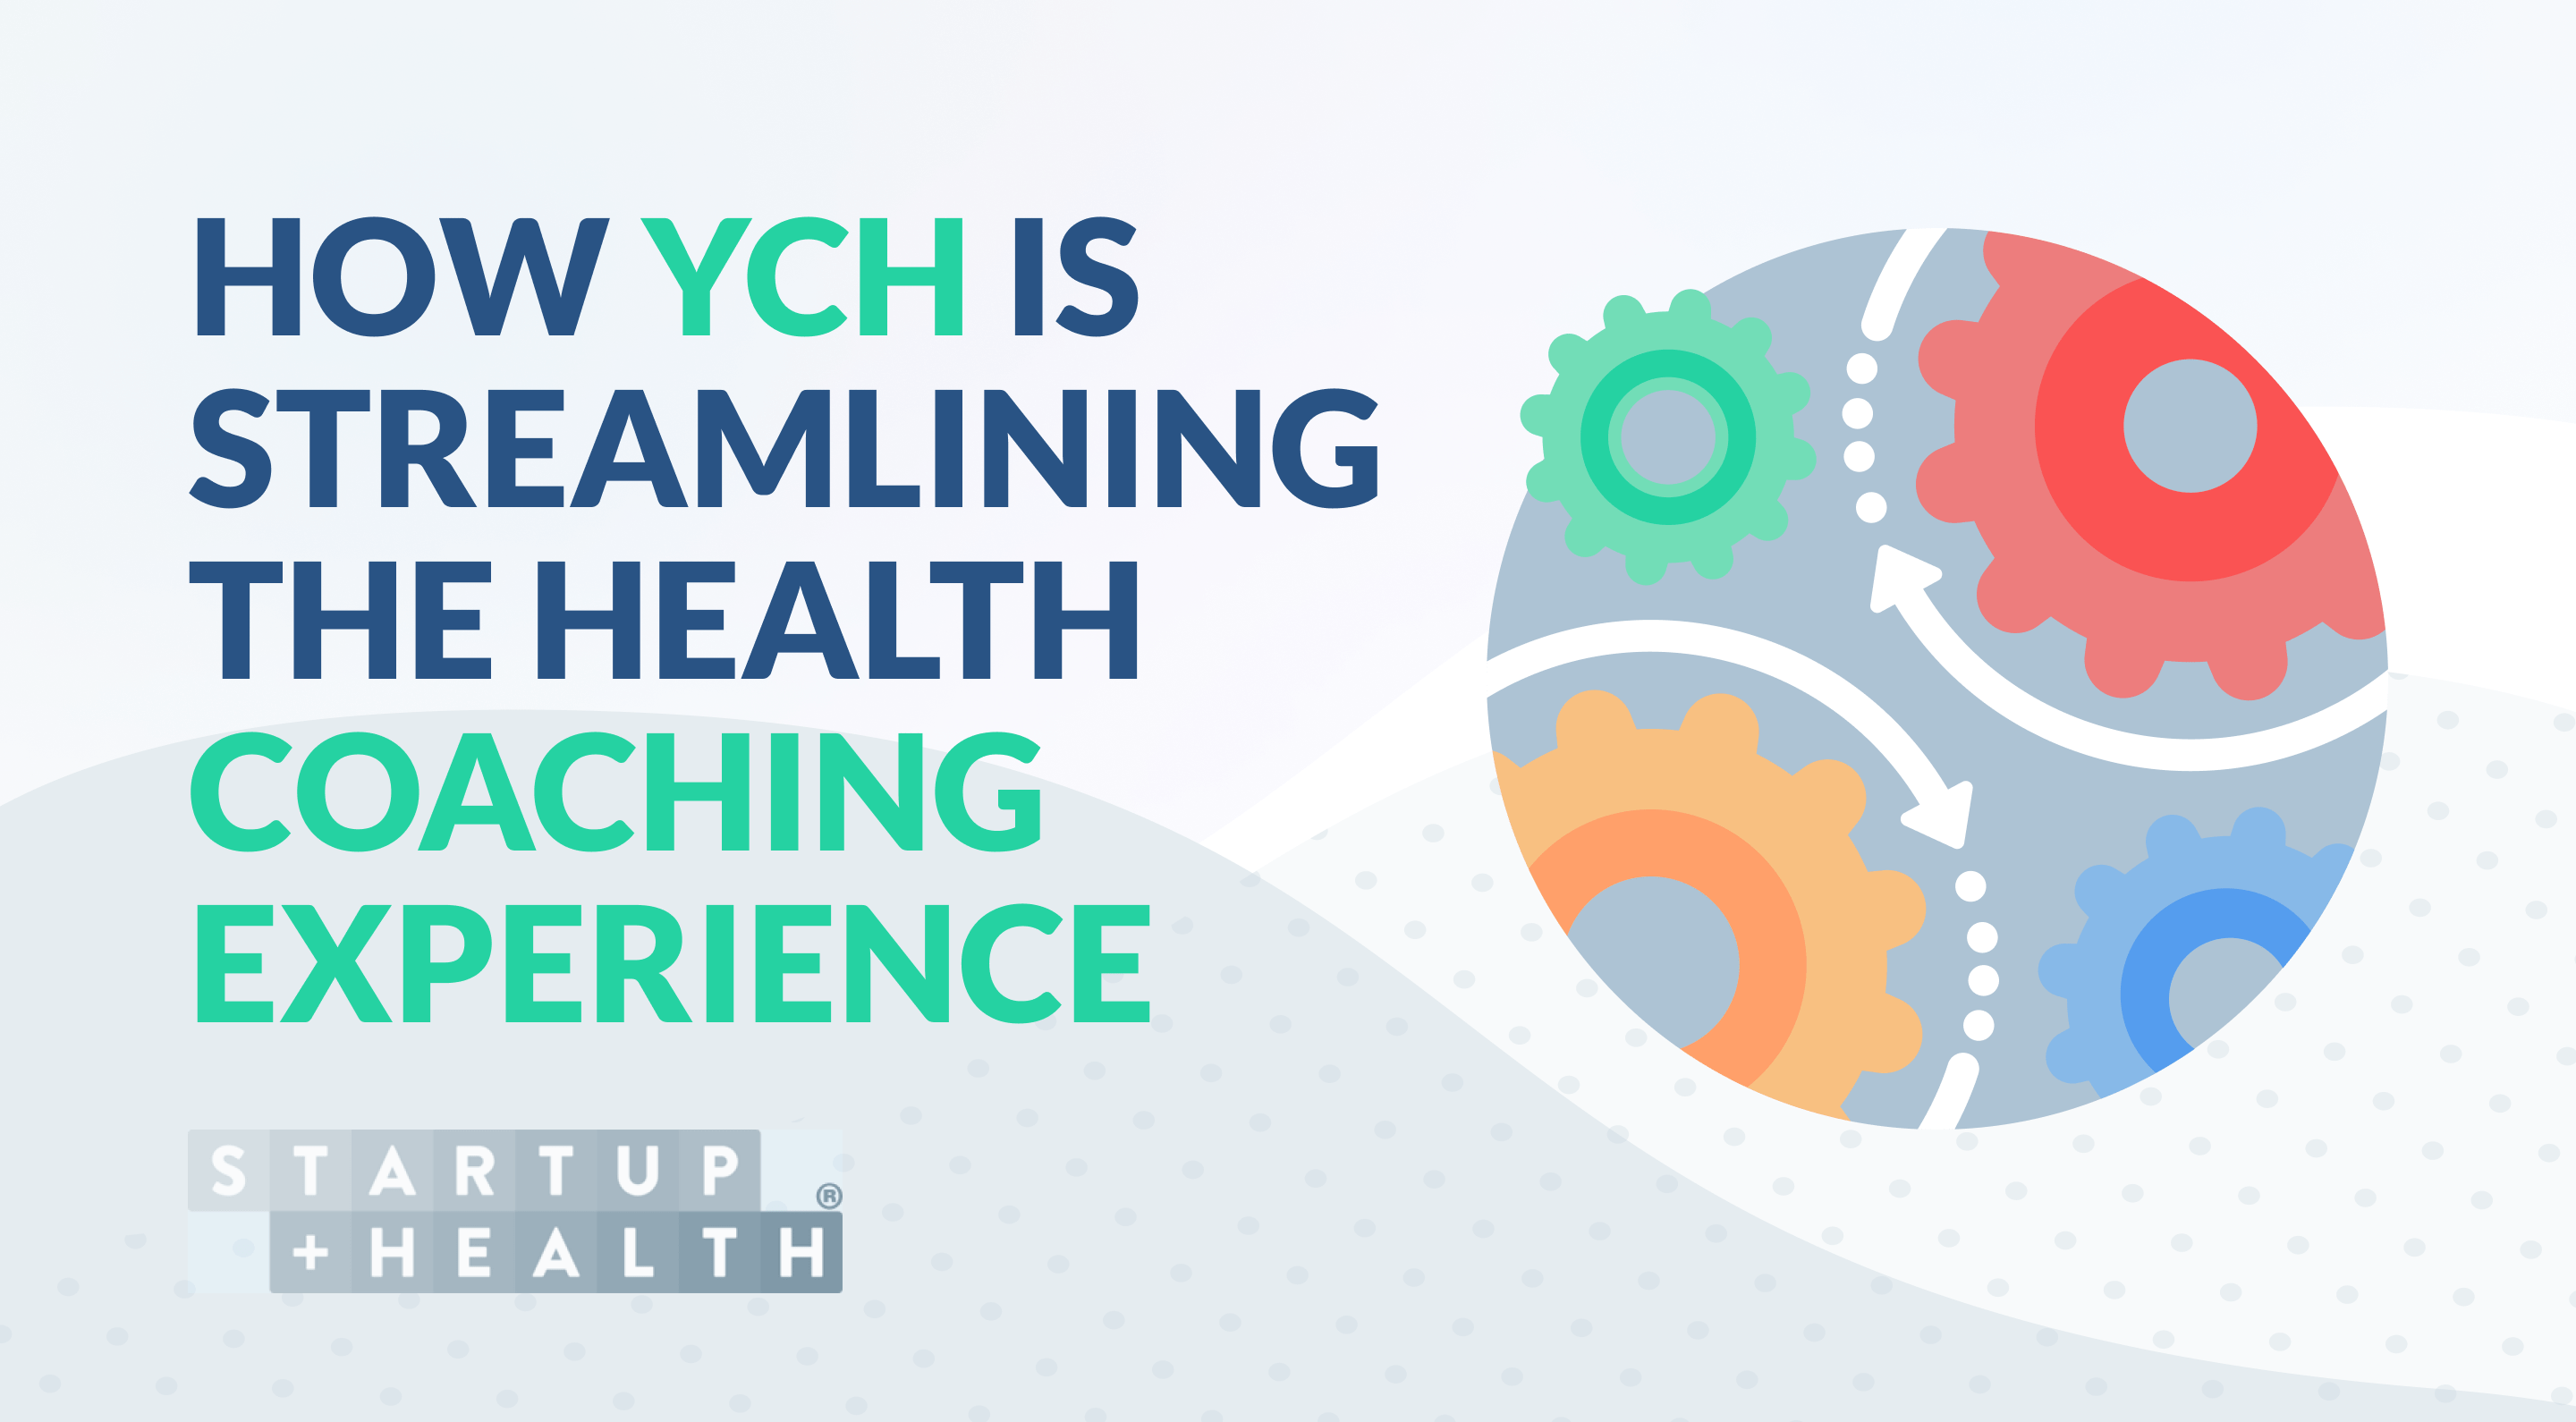 How YourCoach’s Practice Management Platform Is Streamlining the Health Coaching Experience